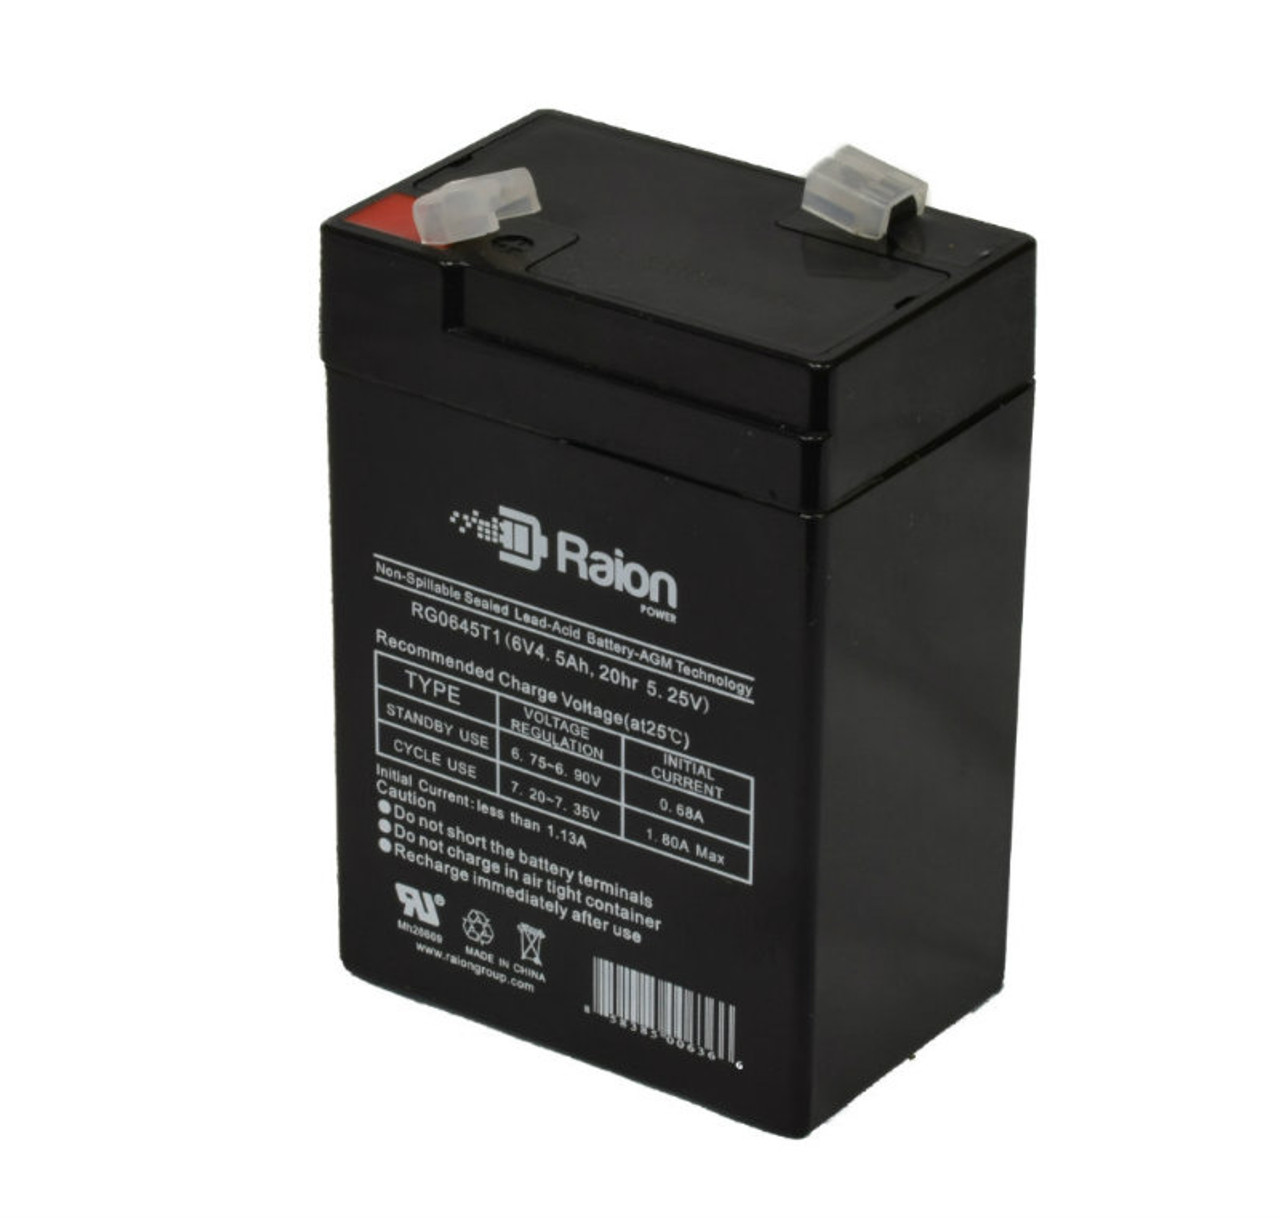 Raion Power RG0645T1 6V 4.5Ah Replacement Battery Cartridge for Kalee KL7007 Ford Focus